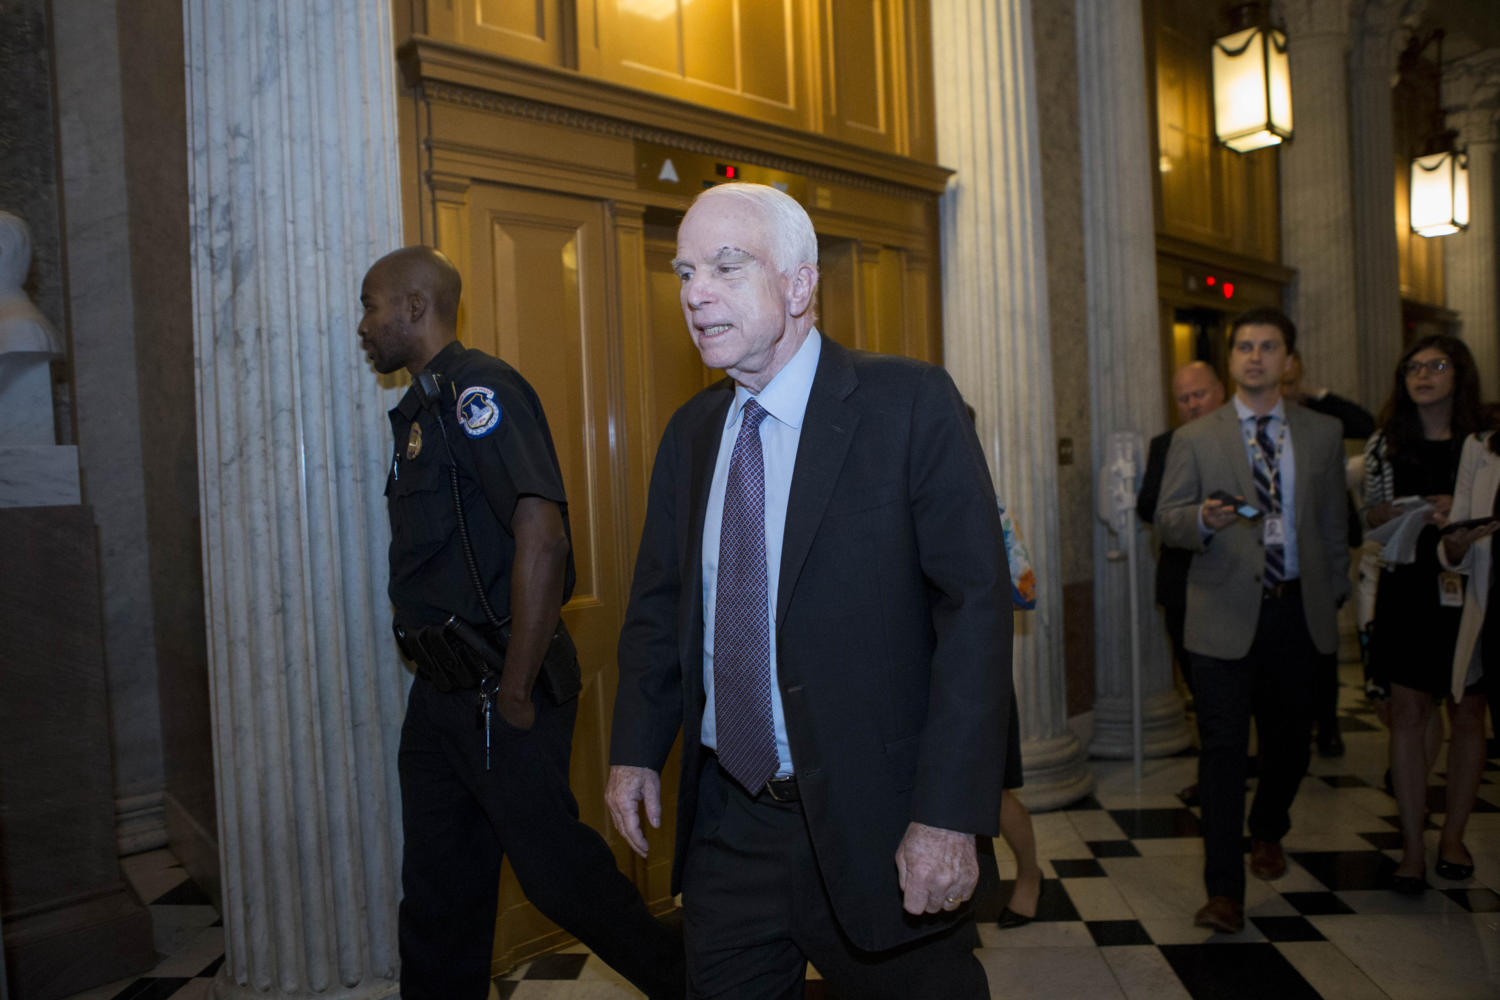 Sen. John McCain (R-AZ) walks to the senate chamber prior to voting against a Skinny Repeal bill which would repeal The Affordable Care Act on July 28, 2017 in Washington, D.C. The Republican bill failed 49-51 with McCain, Sen. Susan Collins of Maine and Sen. Lisa Murkowski of Alasaka voting no alongside Democrats.  (Alex Edelman/ZUma Press/TNS)